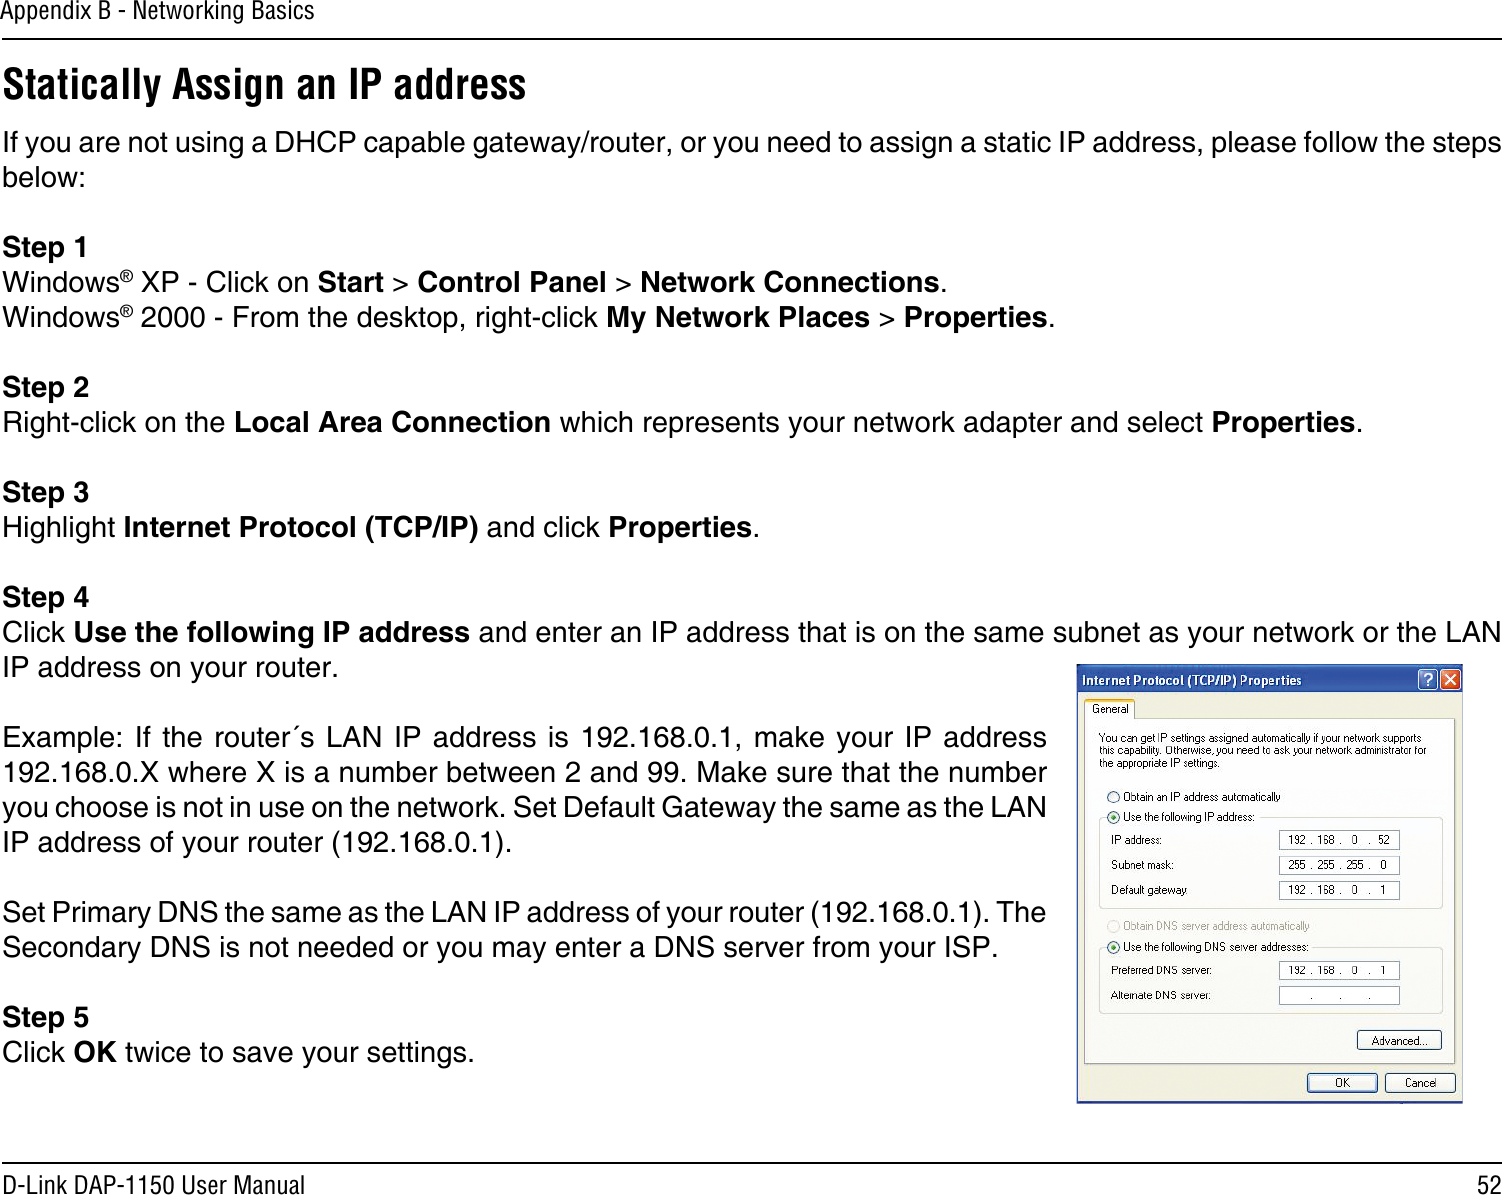 52D-Link DAP-1150 User ManualAppendix B - Networking BasicsStatically Assign an IP addressIf you are not using a DHCP capable gateway/router, or you need to assign a static IP address, please follow the steps below:Step 1Windows® XP - Click on Start &gt; Control Panel &gt; Network Connections.Windows® 2000 - From the desktop, right-click My Network Places &gt; Properties.Step 2Right-click on the Local Area Connection which represents your network adapter and select Properties.Step 3Highlight Internet Protocol (TCP/IP) and click Properties.Step 4Click Use the following IP address and enter an IP address that is on the same subnet as your network or the LAN IP address on your router. Example: If  the router´s  LAN IP  address is 192.168.0.1, make your  IP address 192.168.0.X where X is a number between 2 and 99. Make sure that the number you choose is not in use on the network. Set Default Gateway the same as the LAN IP address of your router (192.168.0.1). Set Primary DNS the same as the LAN IP address of your router (192.168.0.1). The Secondary DNS is not needed or you may enter a DNS server from your ISP.Step 5Click OK twice to save your settings.